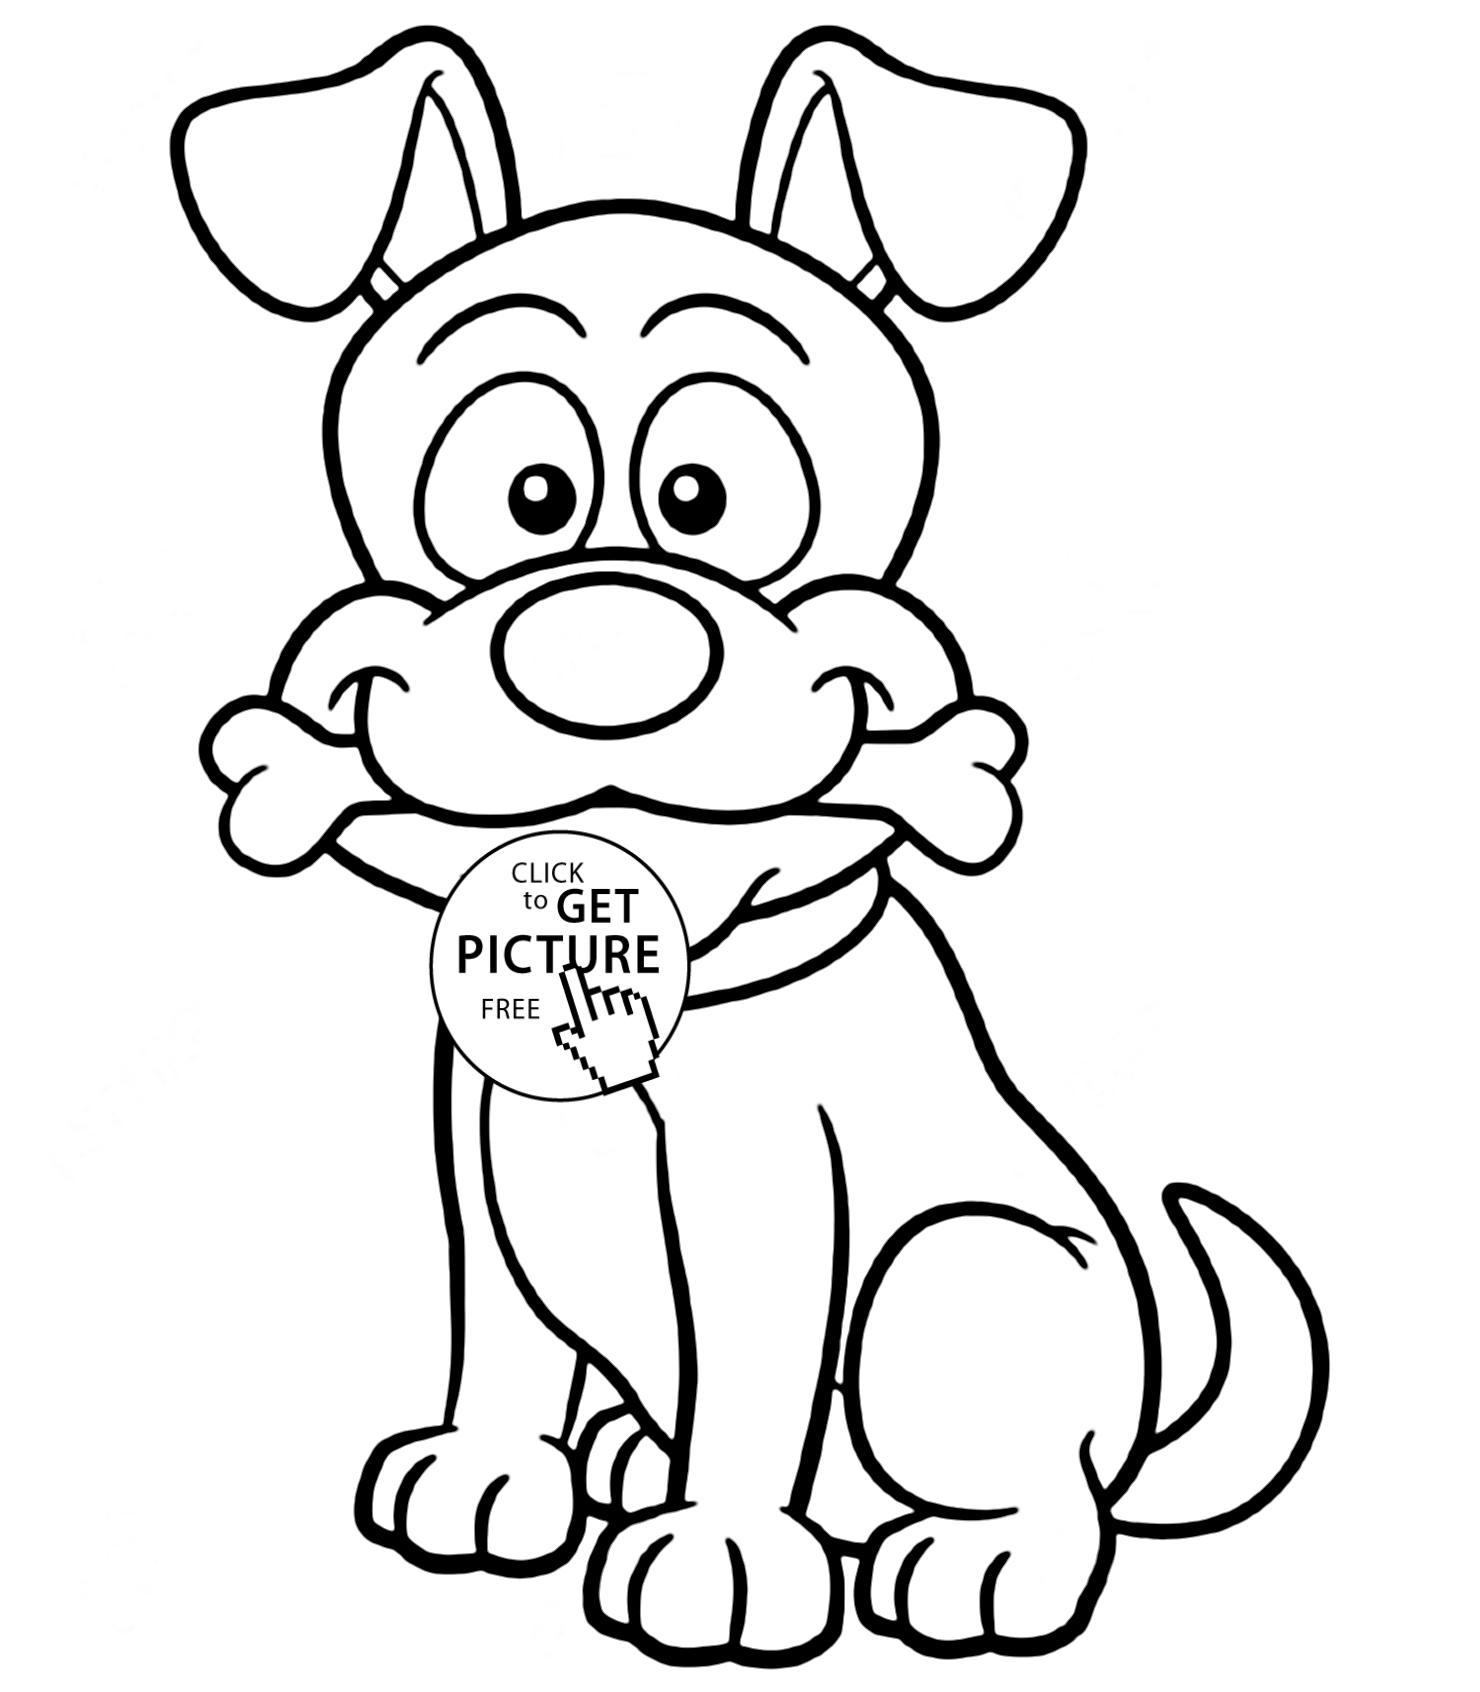 large coloring pages big flower coloring pages coloring pages to download and coloring large pages 